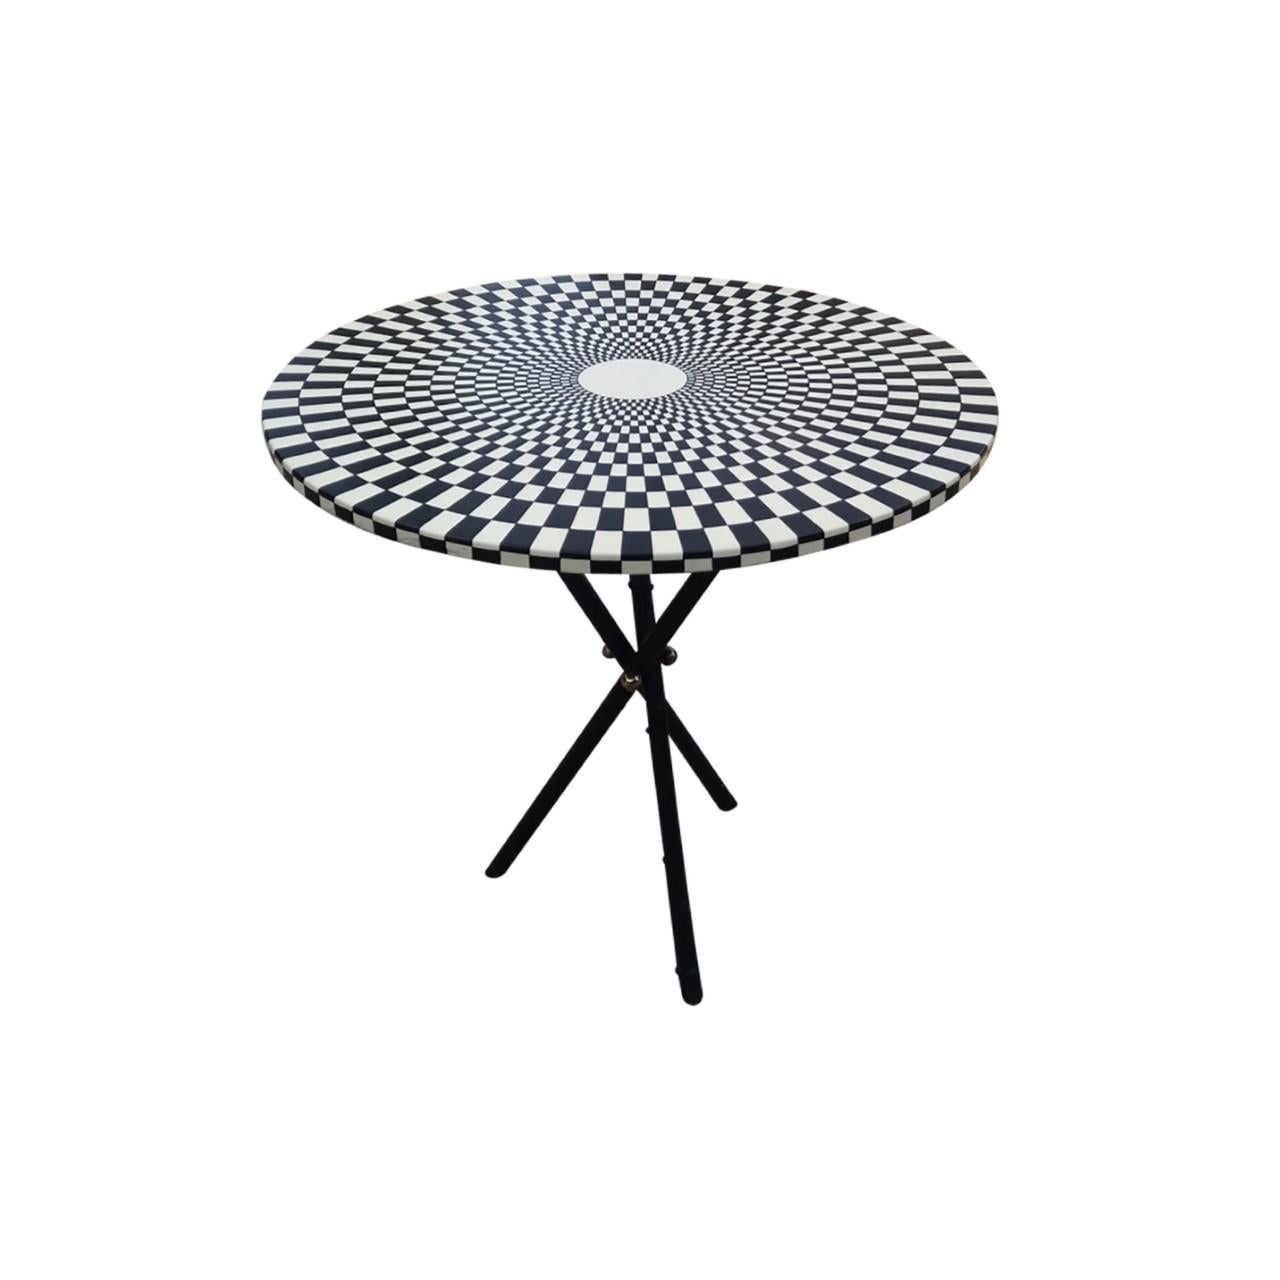 Piero Fornasetti ‘Egocentrismo’ side table or occasional table.
The top tray is in laquered wood.
Signed 